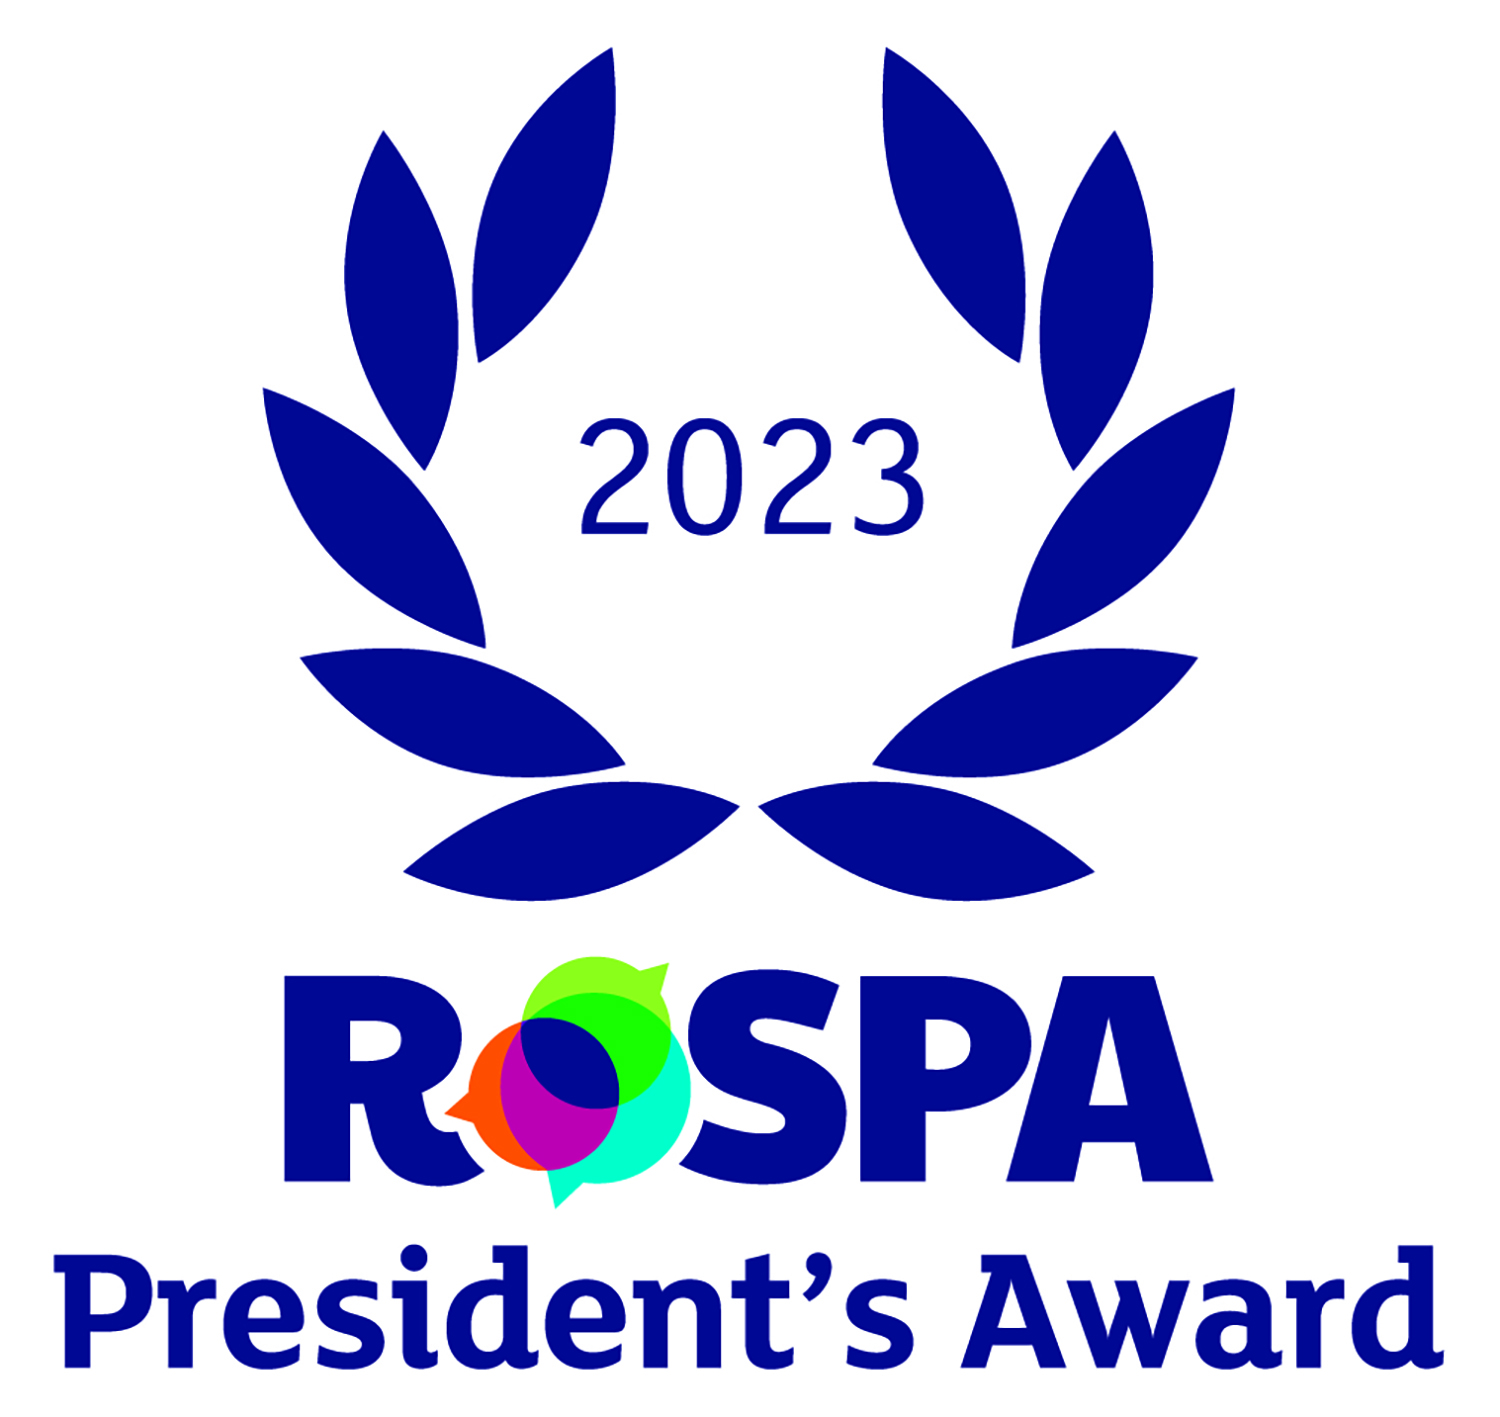 ECS Engineering Services has won the prestigious Royal Society for the Prevention of Accidents (RoSPA) President’s Award.